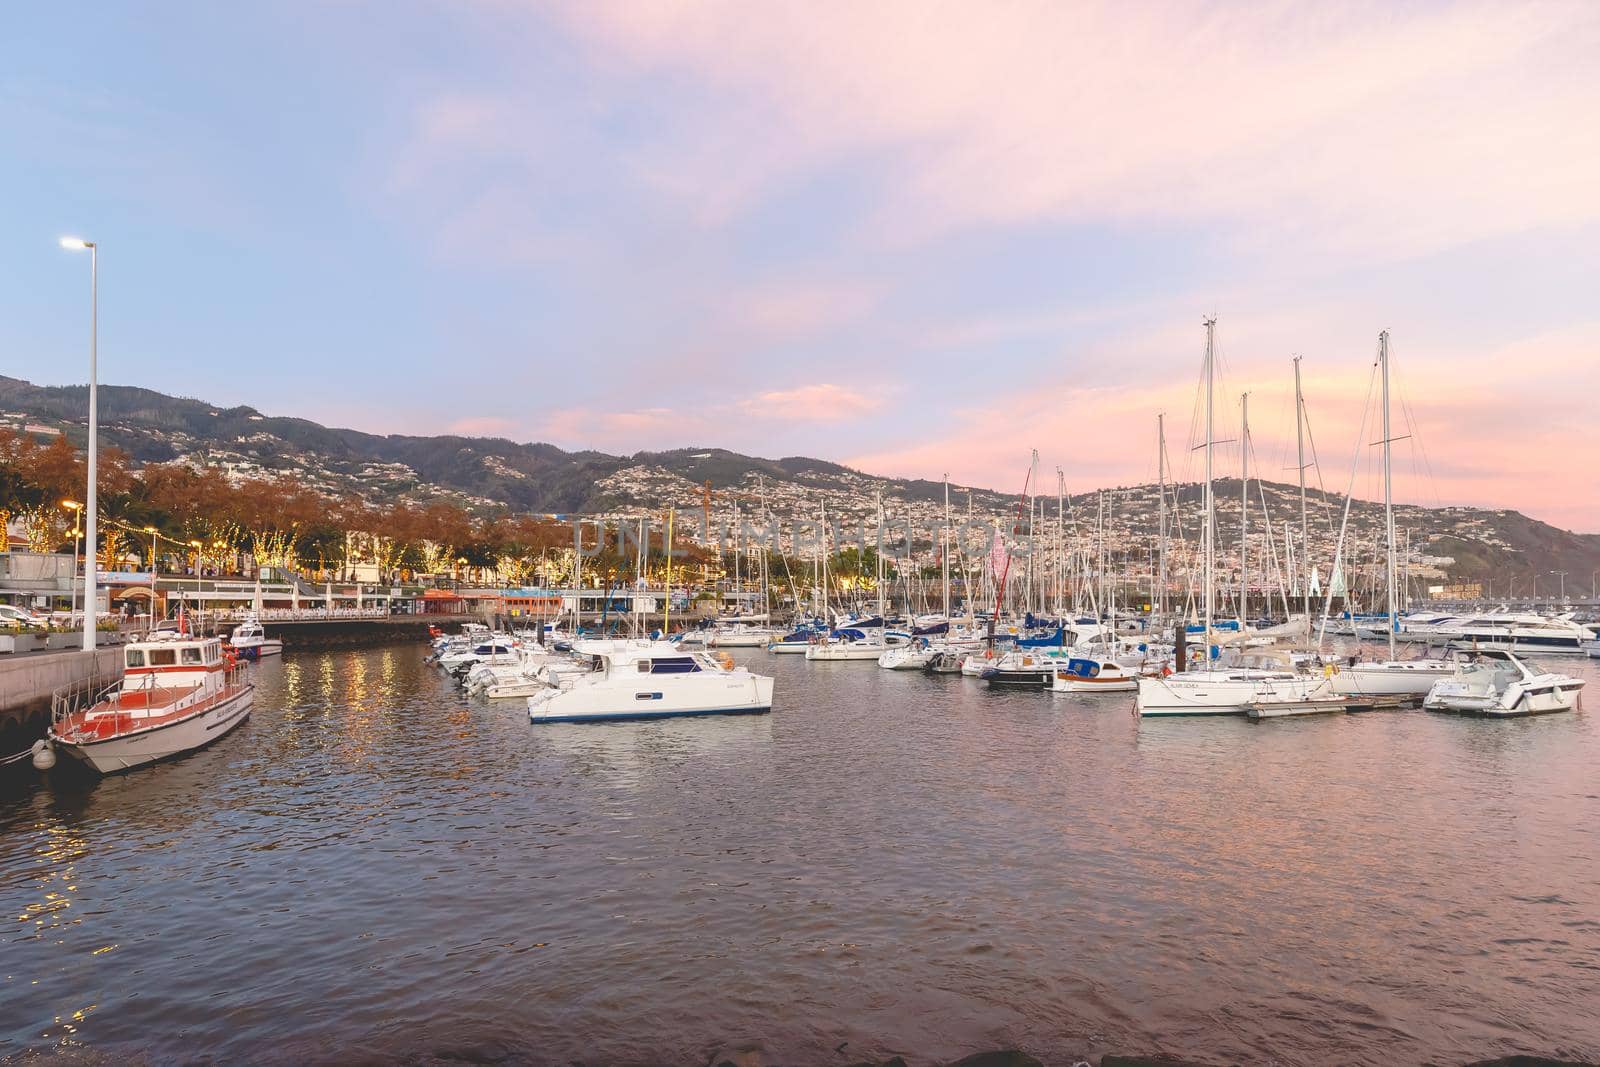 Funchal marina in the evening where people gather to watch the new year fireworks by AtlanticEUROSTOXX